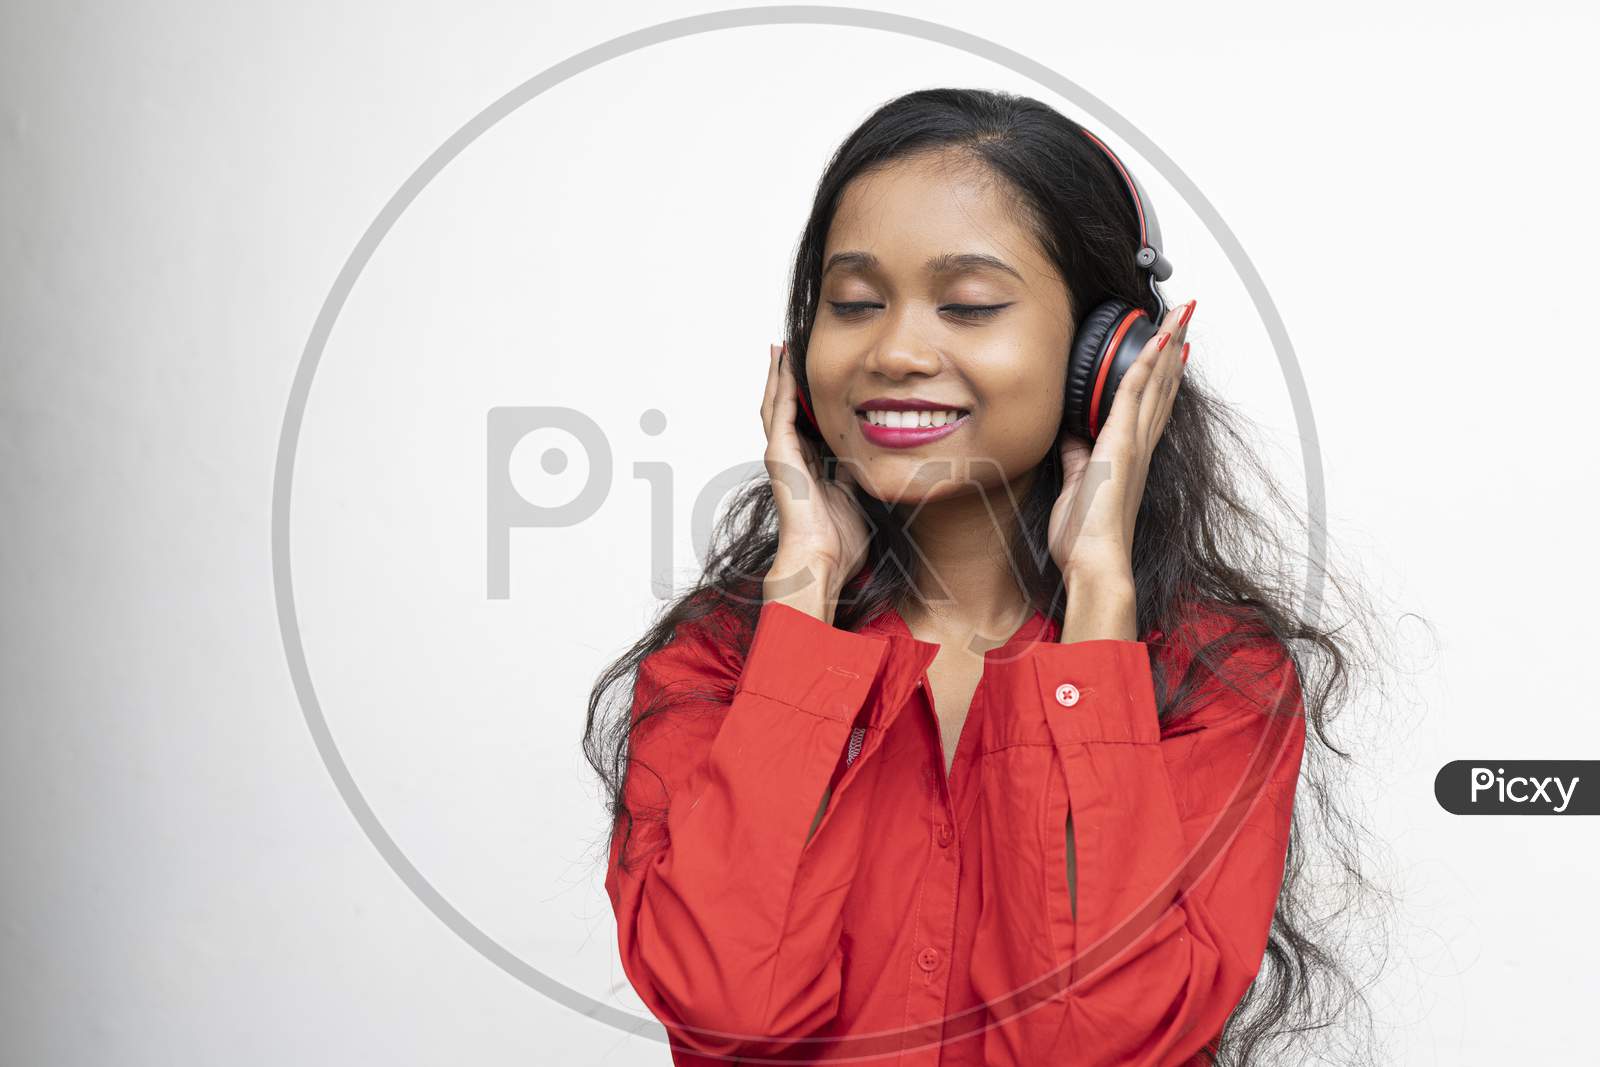 Young Charming Girl In Red Shirt Listening To Songs In Her Headphones. White Background And Copy Space.